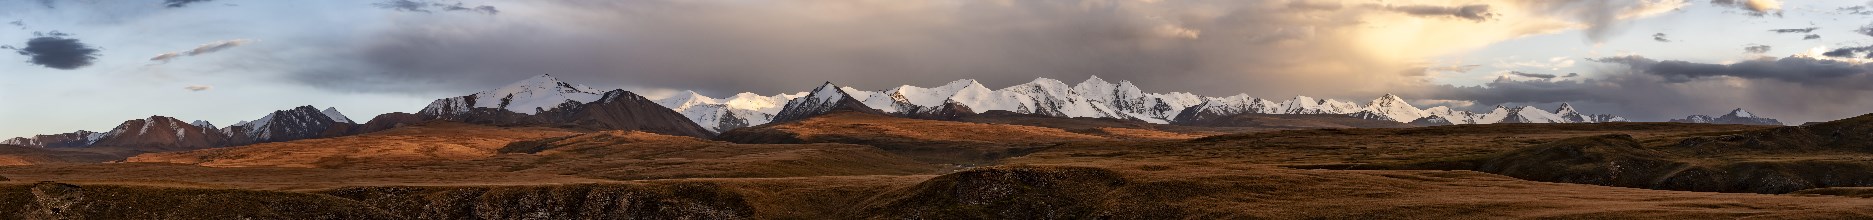 Panorama, Glaciated and snow-capped mountains, dramatic mountain landscape at sunset, autumnal